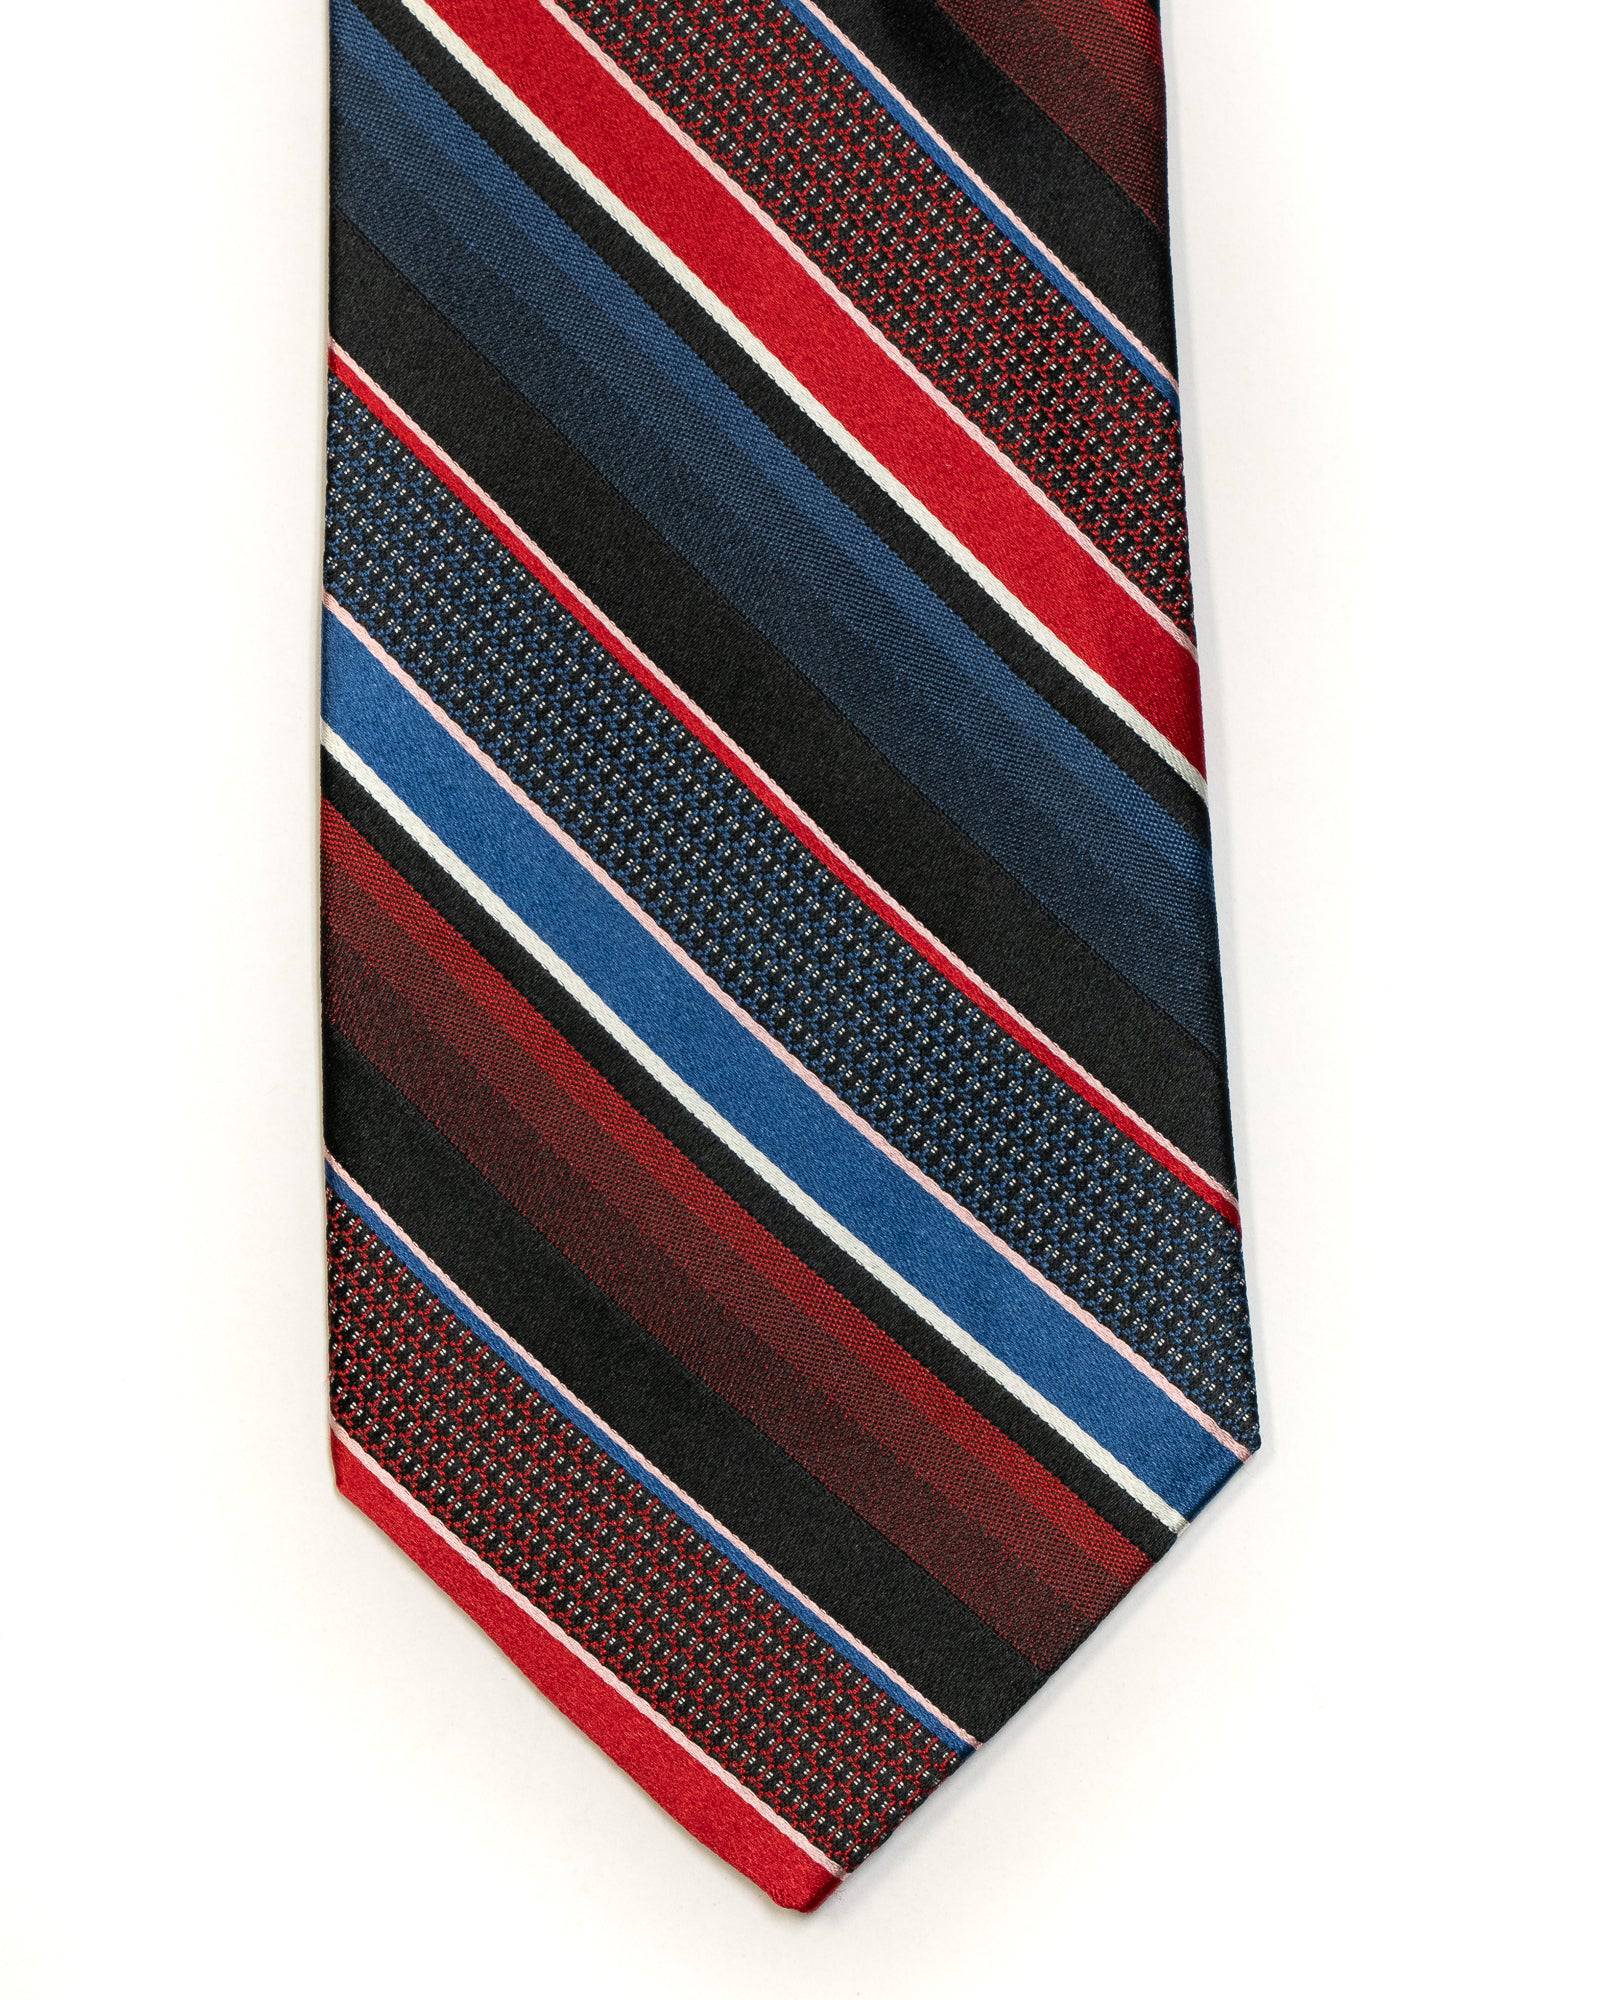 Silk Tie in Navy With Red Stripe - Rainwater's Men's Clothing and Tuxedo Rental